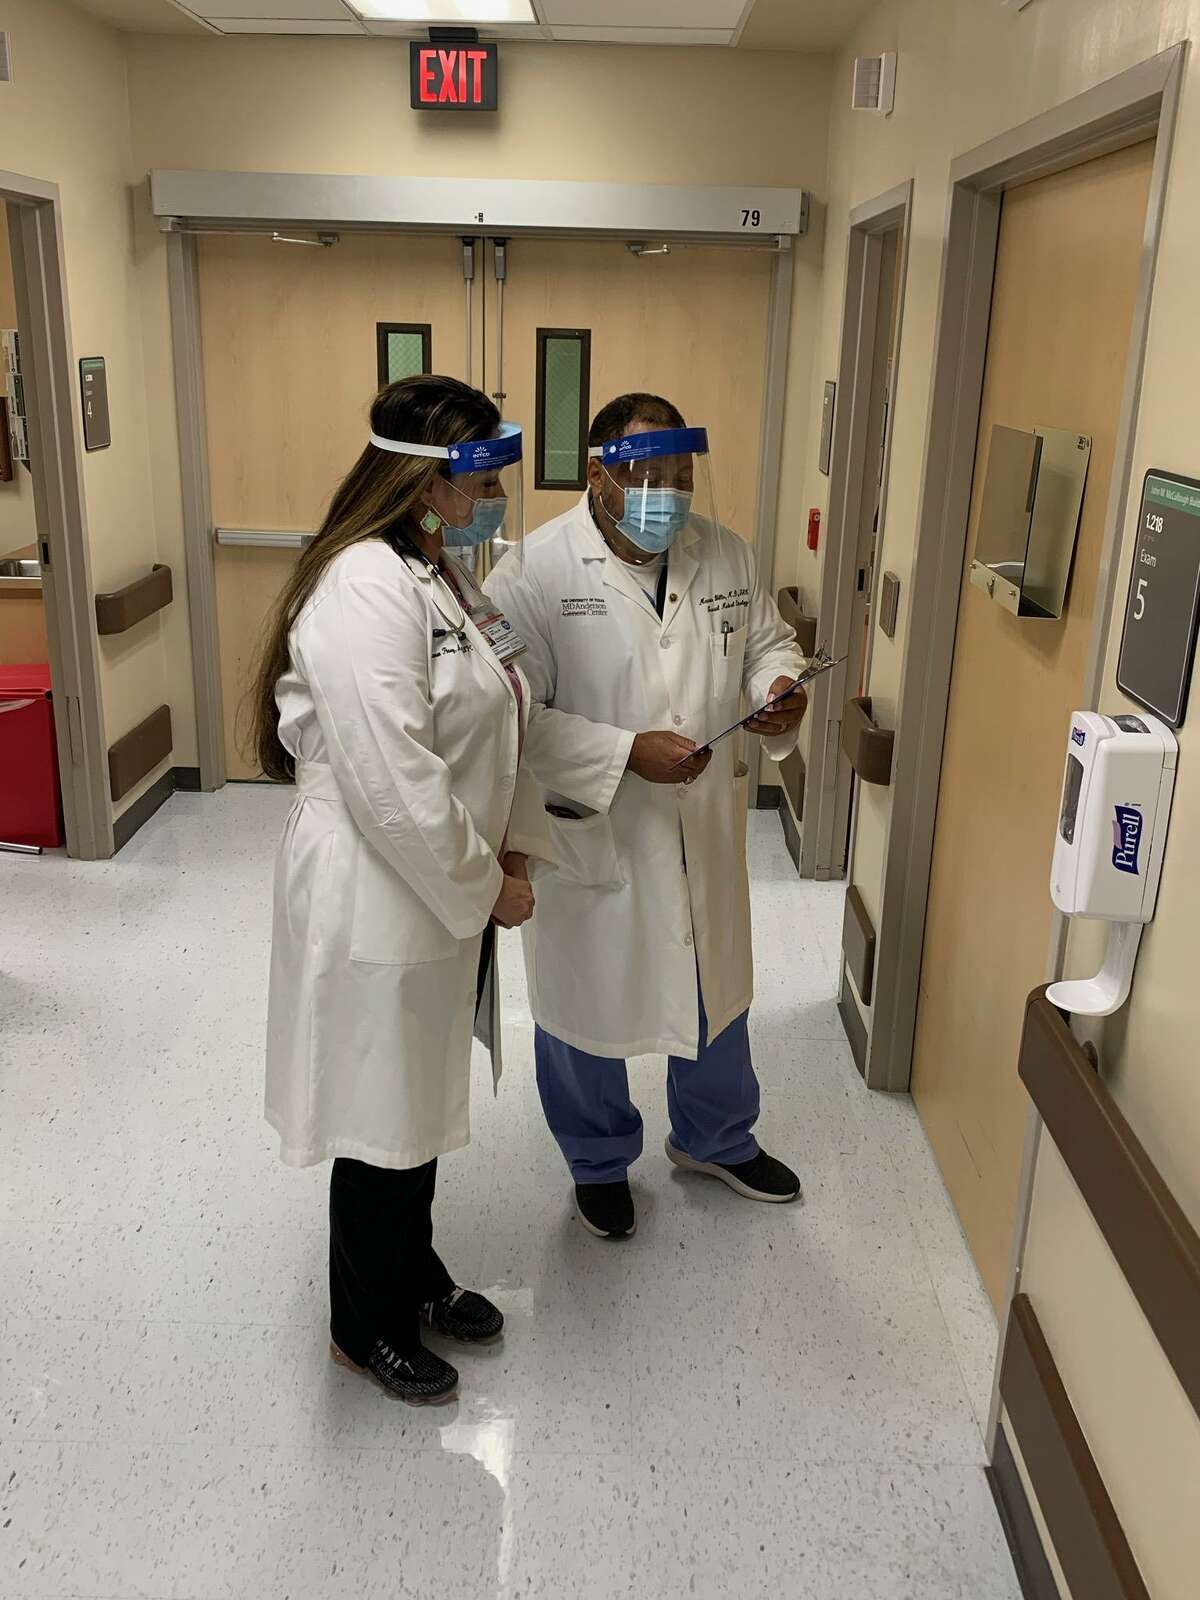 Lauren Perez, family nurse practitioner at MD Anderson Cancer Center, consults with Dr. Maurice Willis, professor in the hospital’s General Oncology Department of Cancer Medicine.